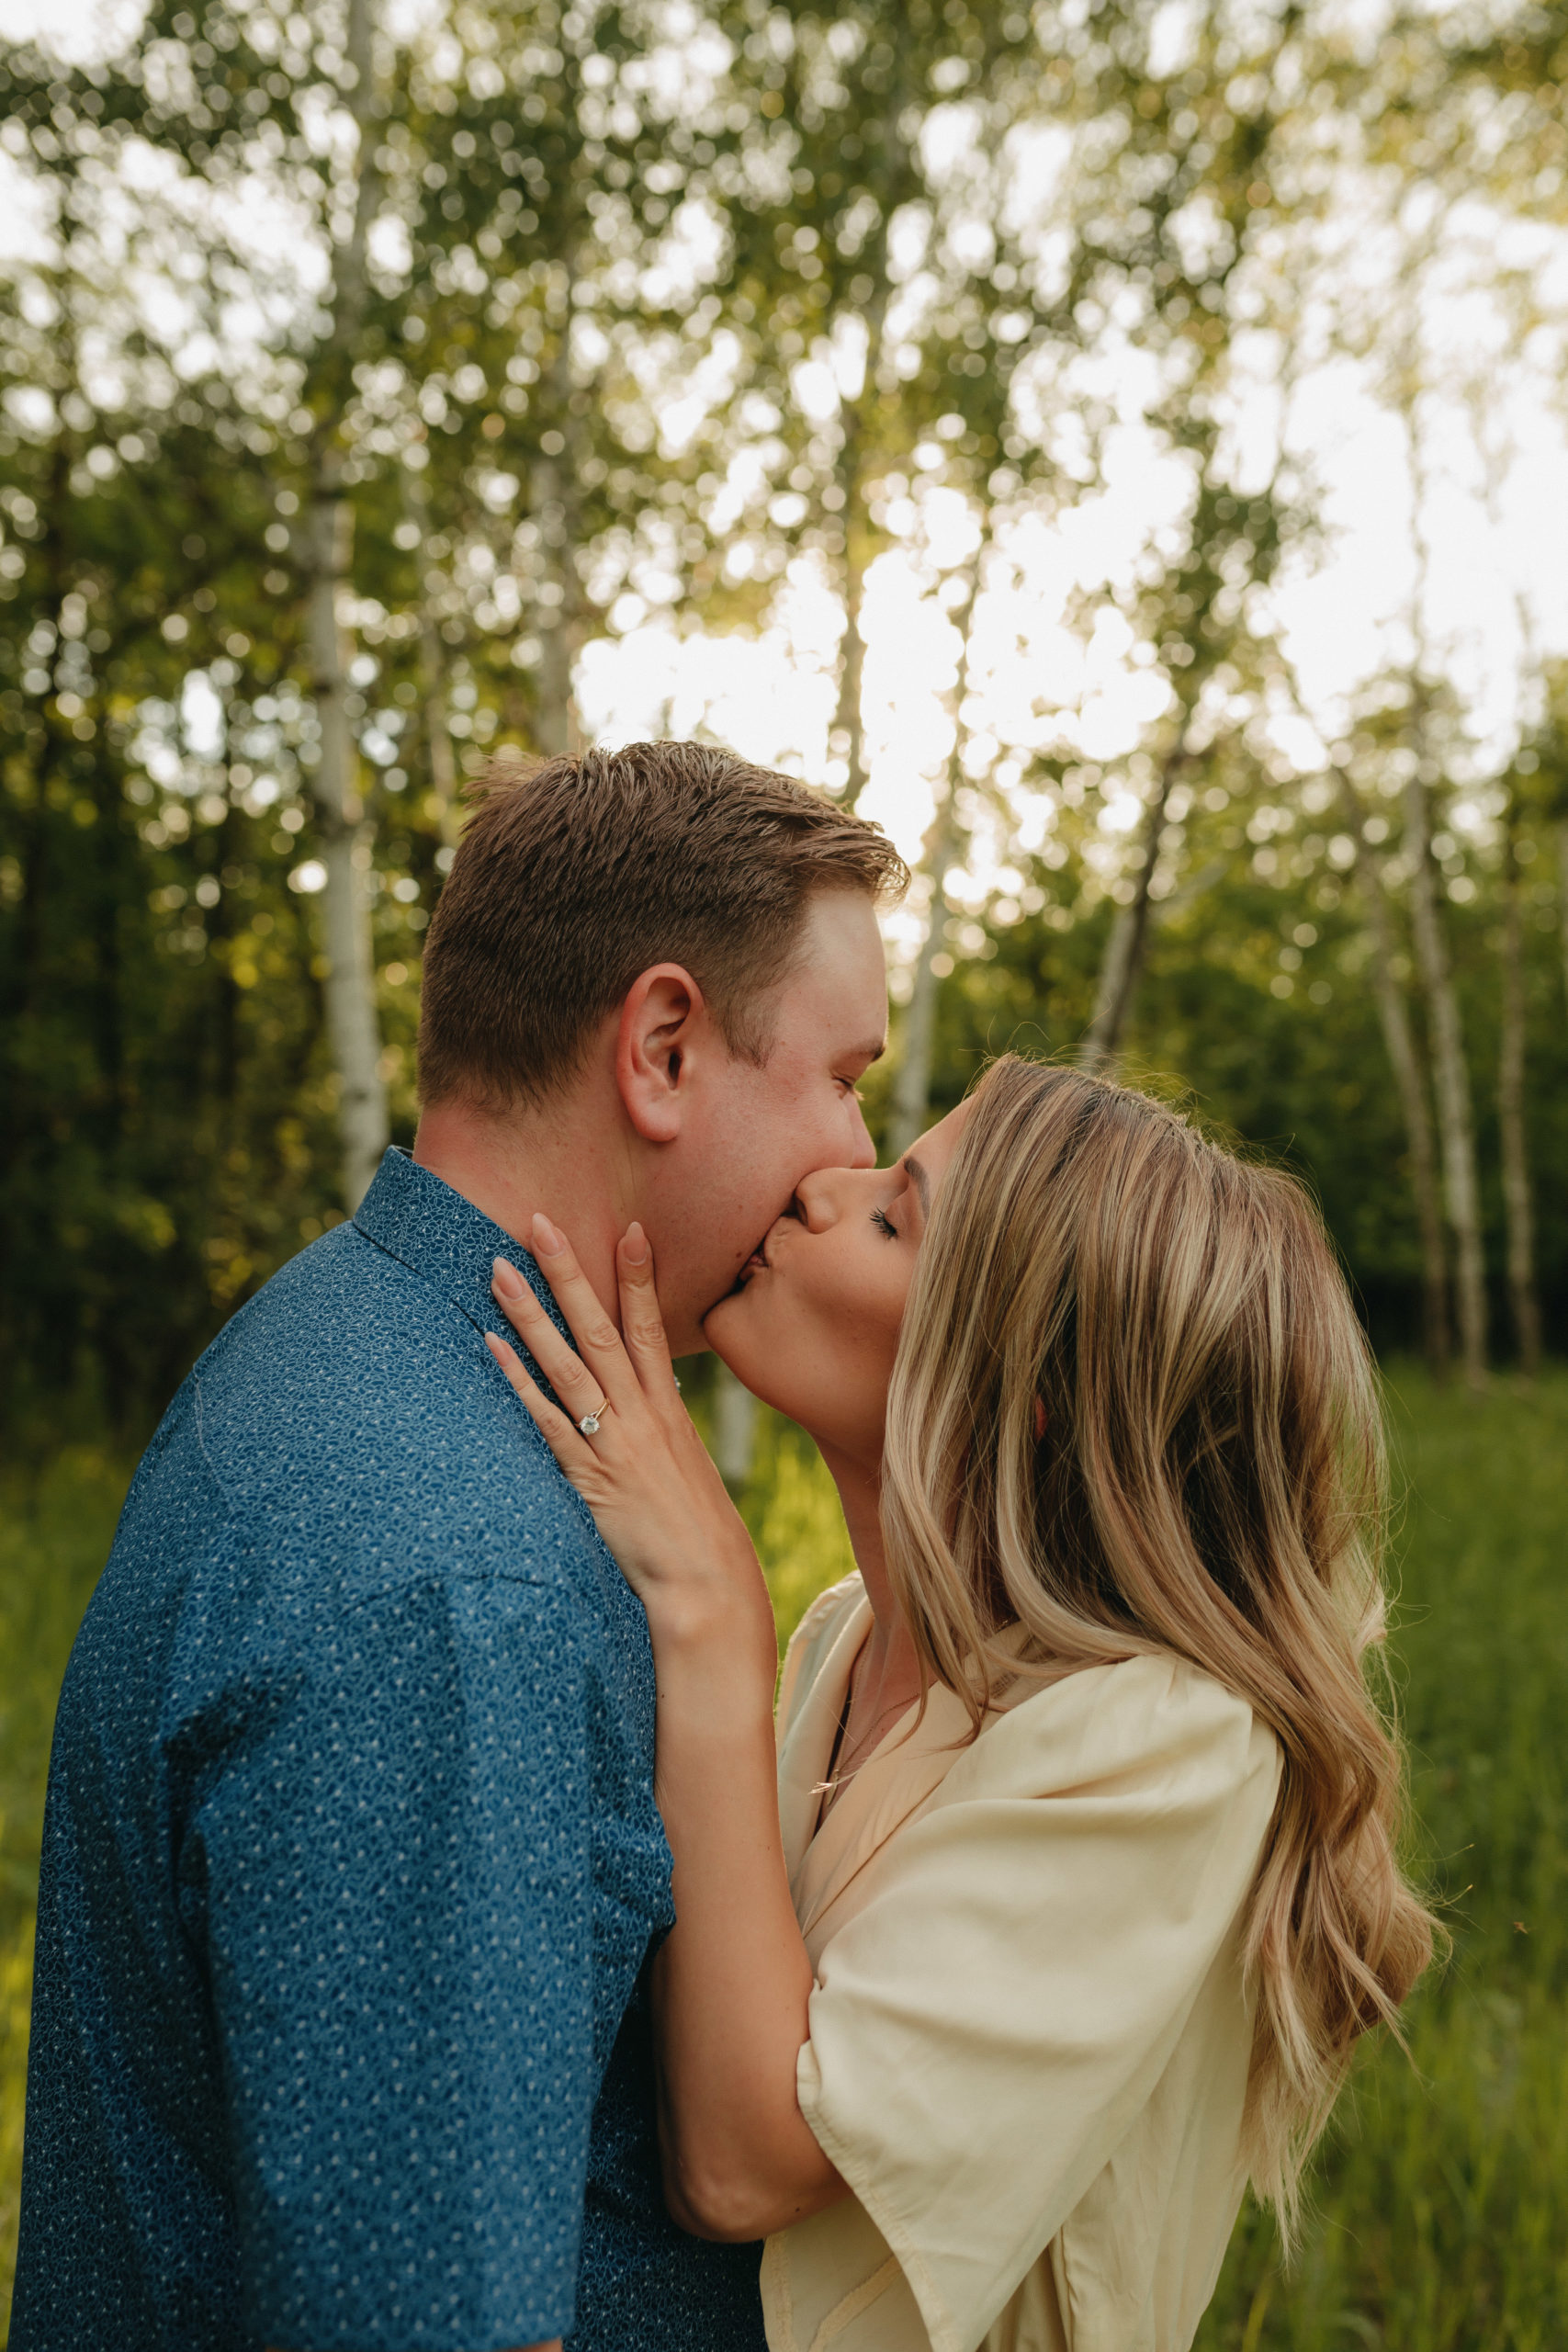 Woman kissing man's cheek in the forest